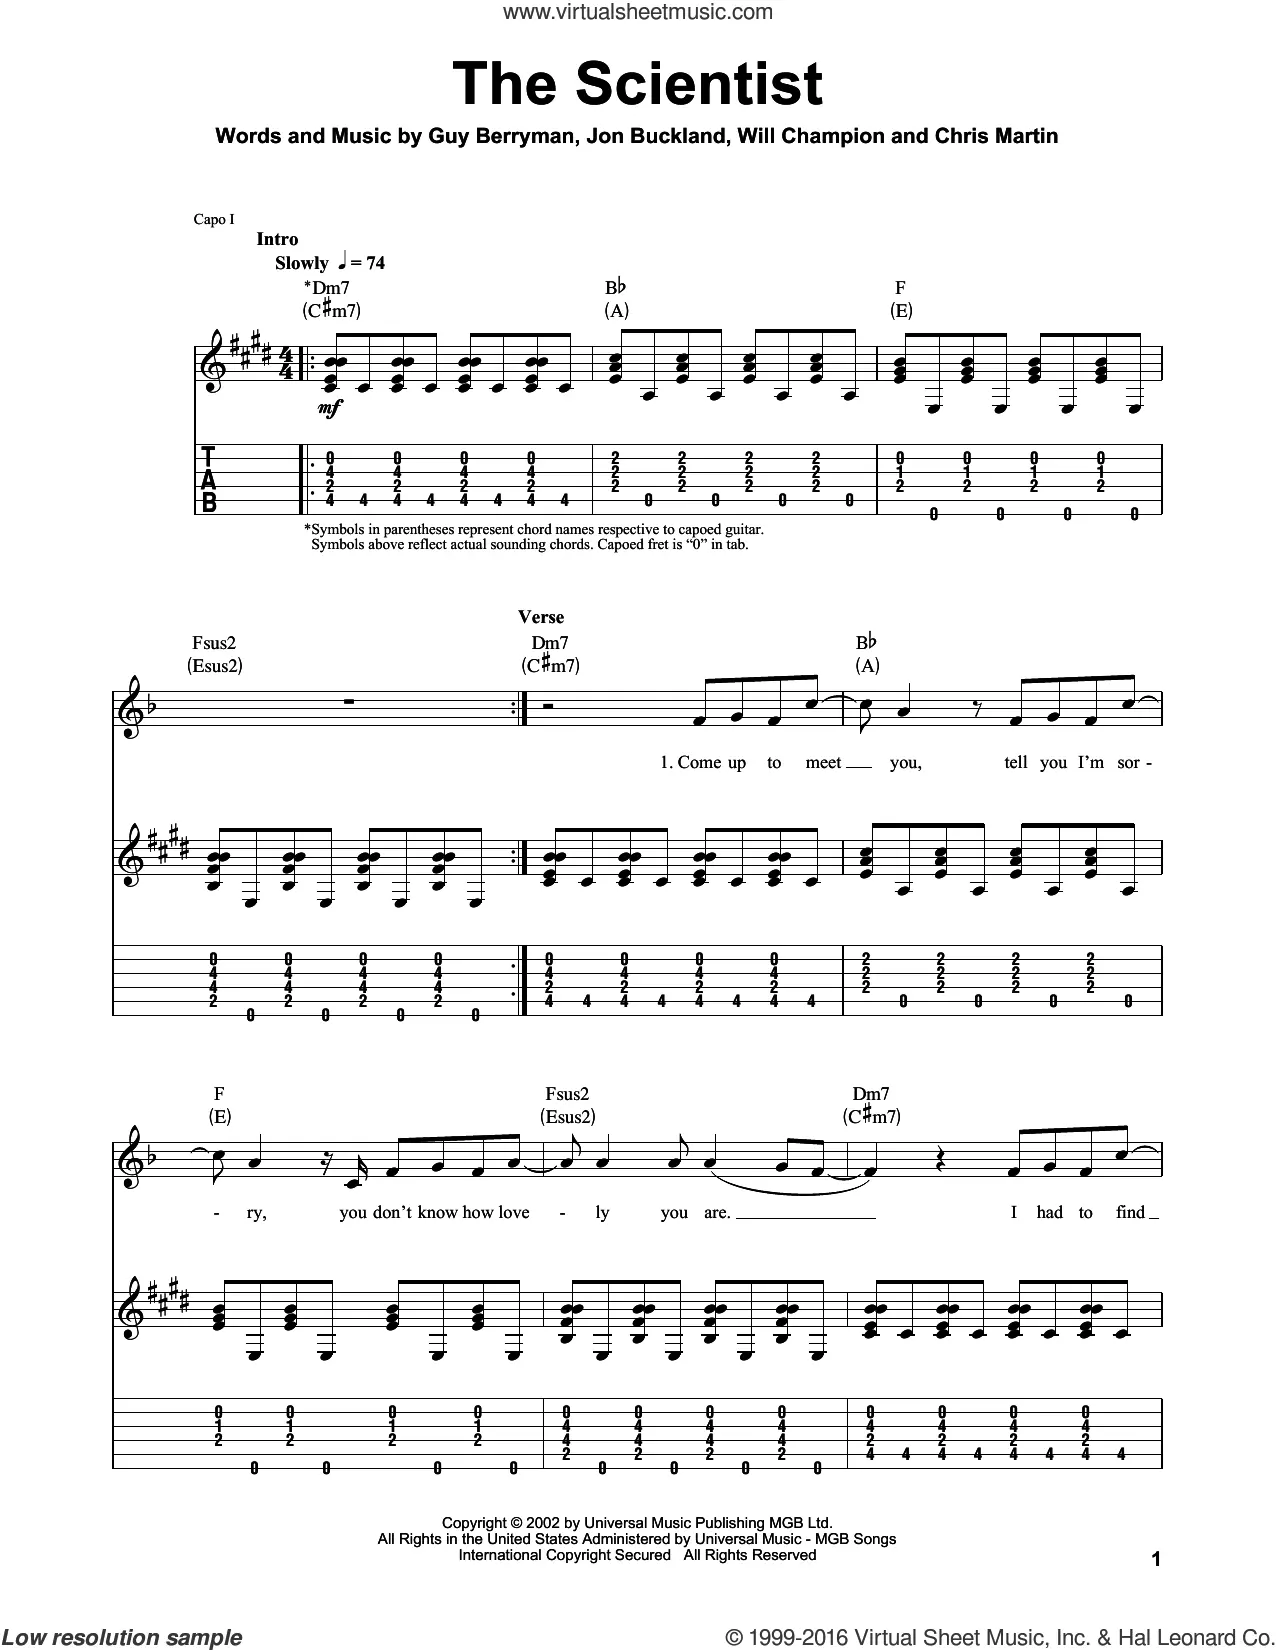 True Love by Coldplay - Piano, Vocal, Guitar - Digital Sheet Music